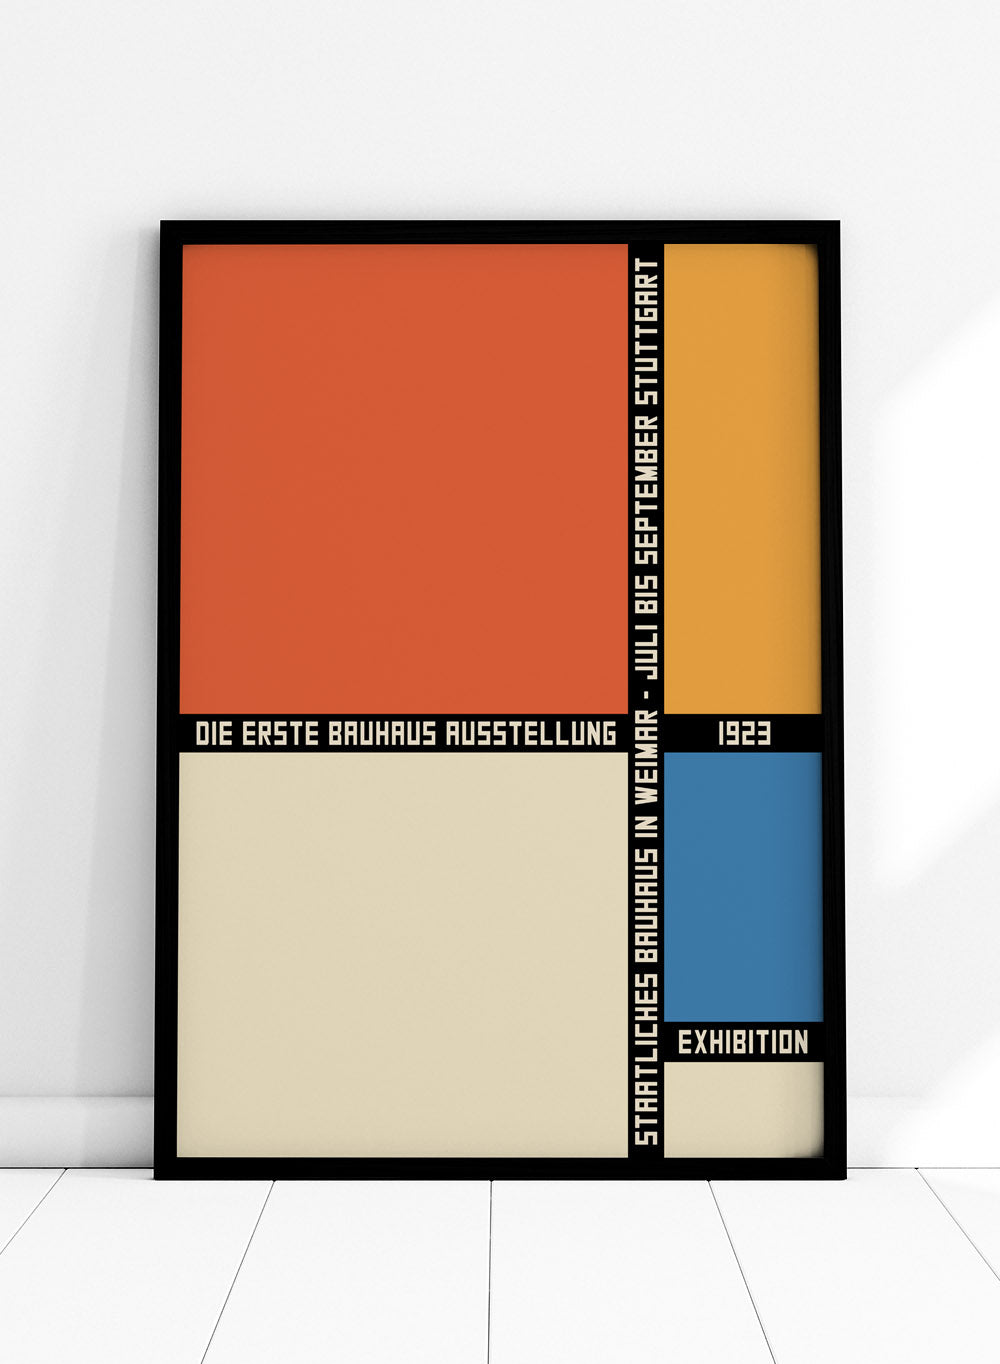 Geometric Color Block Poster and Prints Canvas